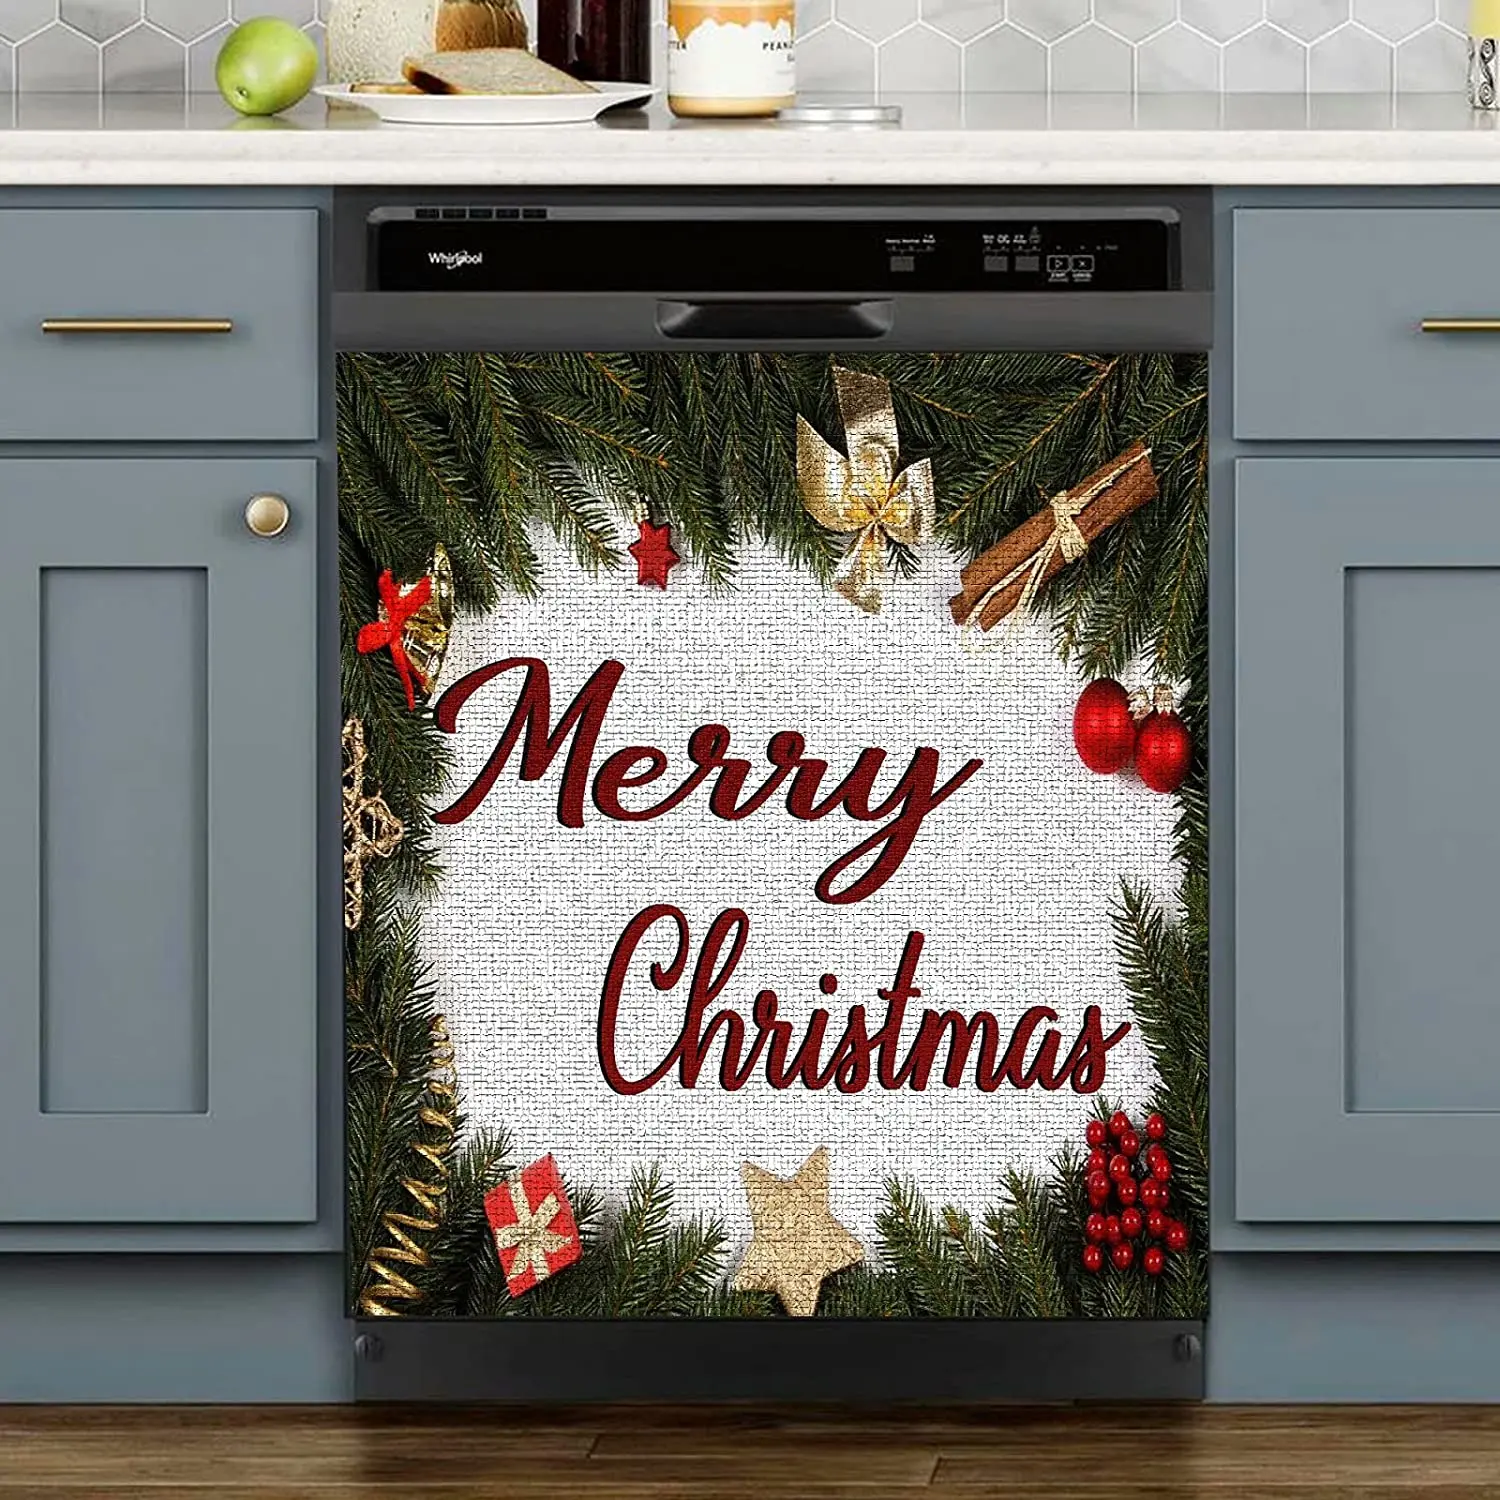 

Merry Christmas Dishwasher Magnet Cover,Home Kitchen Decoration,Christmas Sticker Decorative Refrigerator,New Year Magnetic Deca